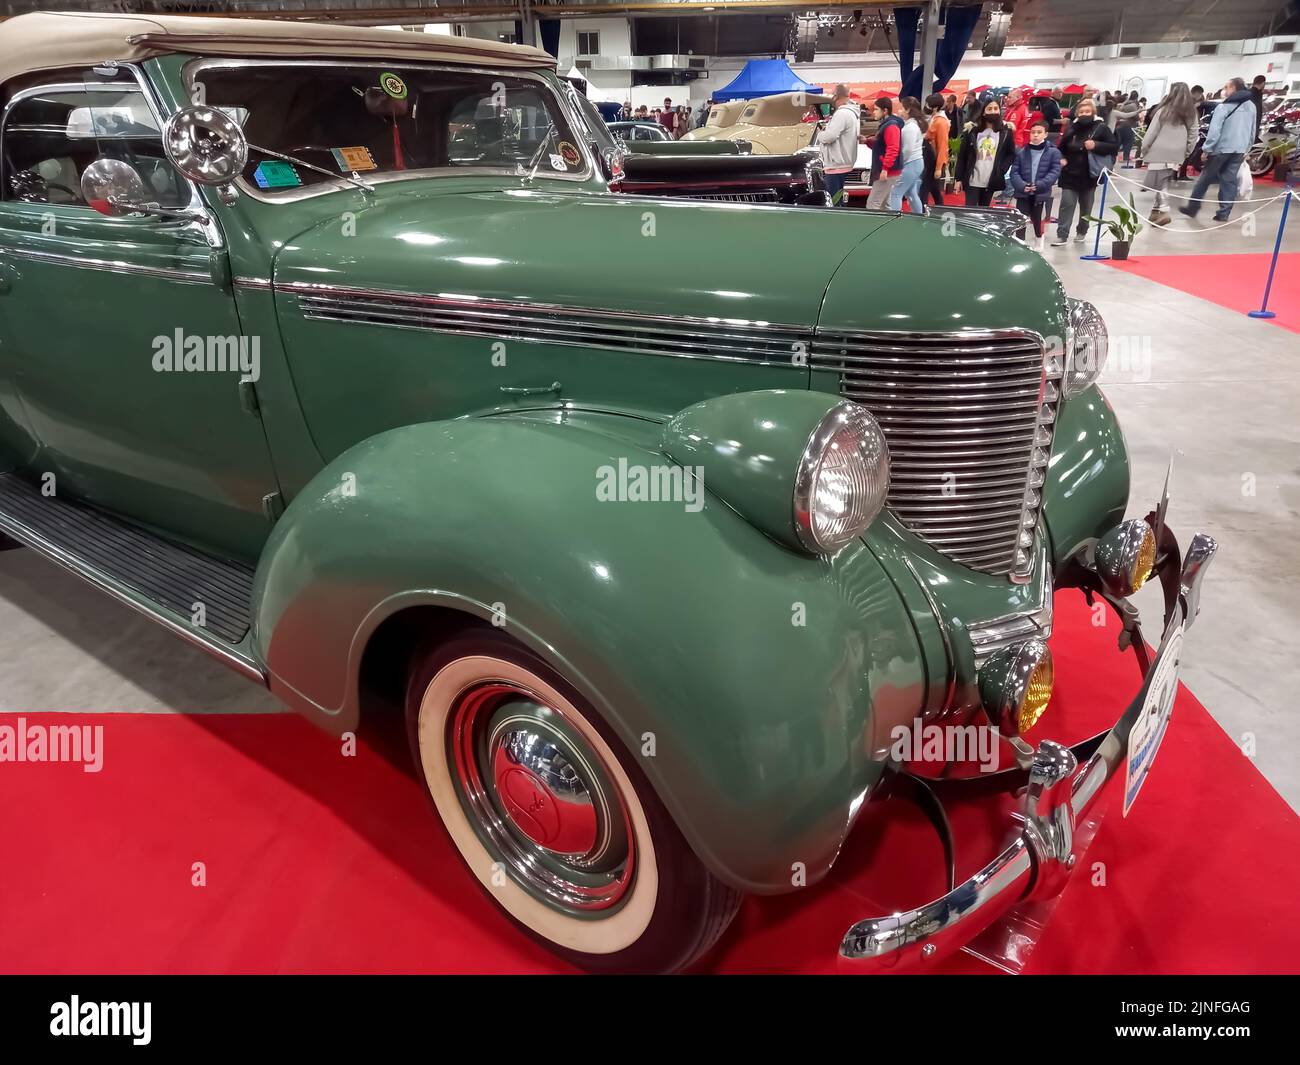 Old antique green 1938 DeSoto Six series S-5 coupe convertible on a red carpet. Chromes. Grille. Exhibit hall. Classic car show. Stock Photo